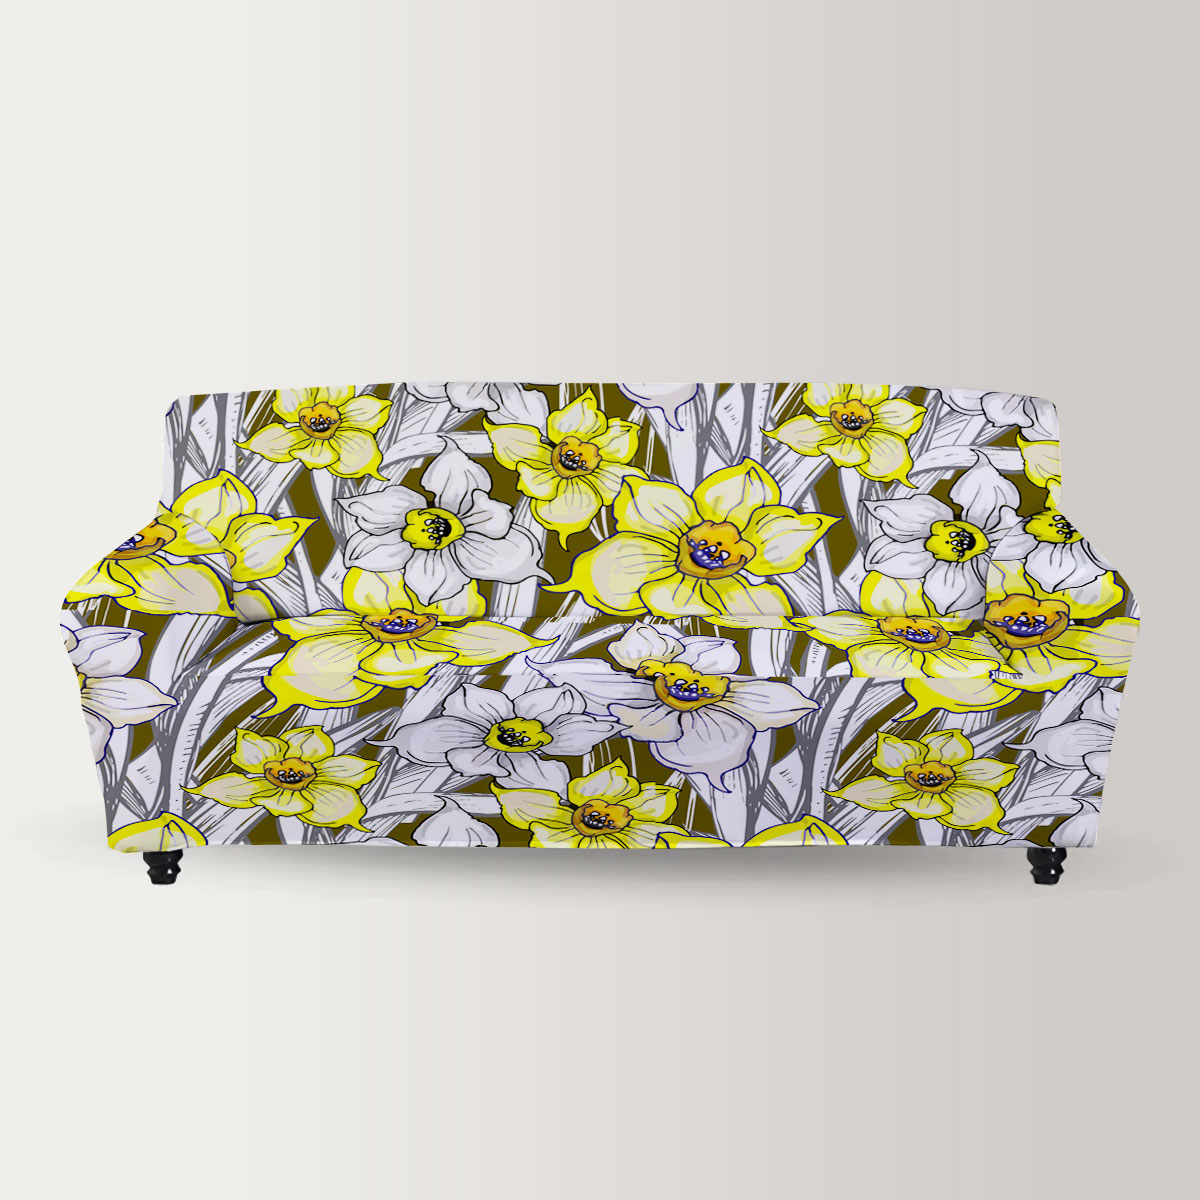 Botanical With Flowers Of Narcissus Daffodil Sofa Cover